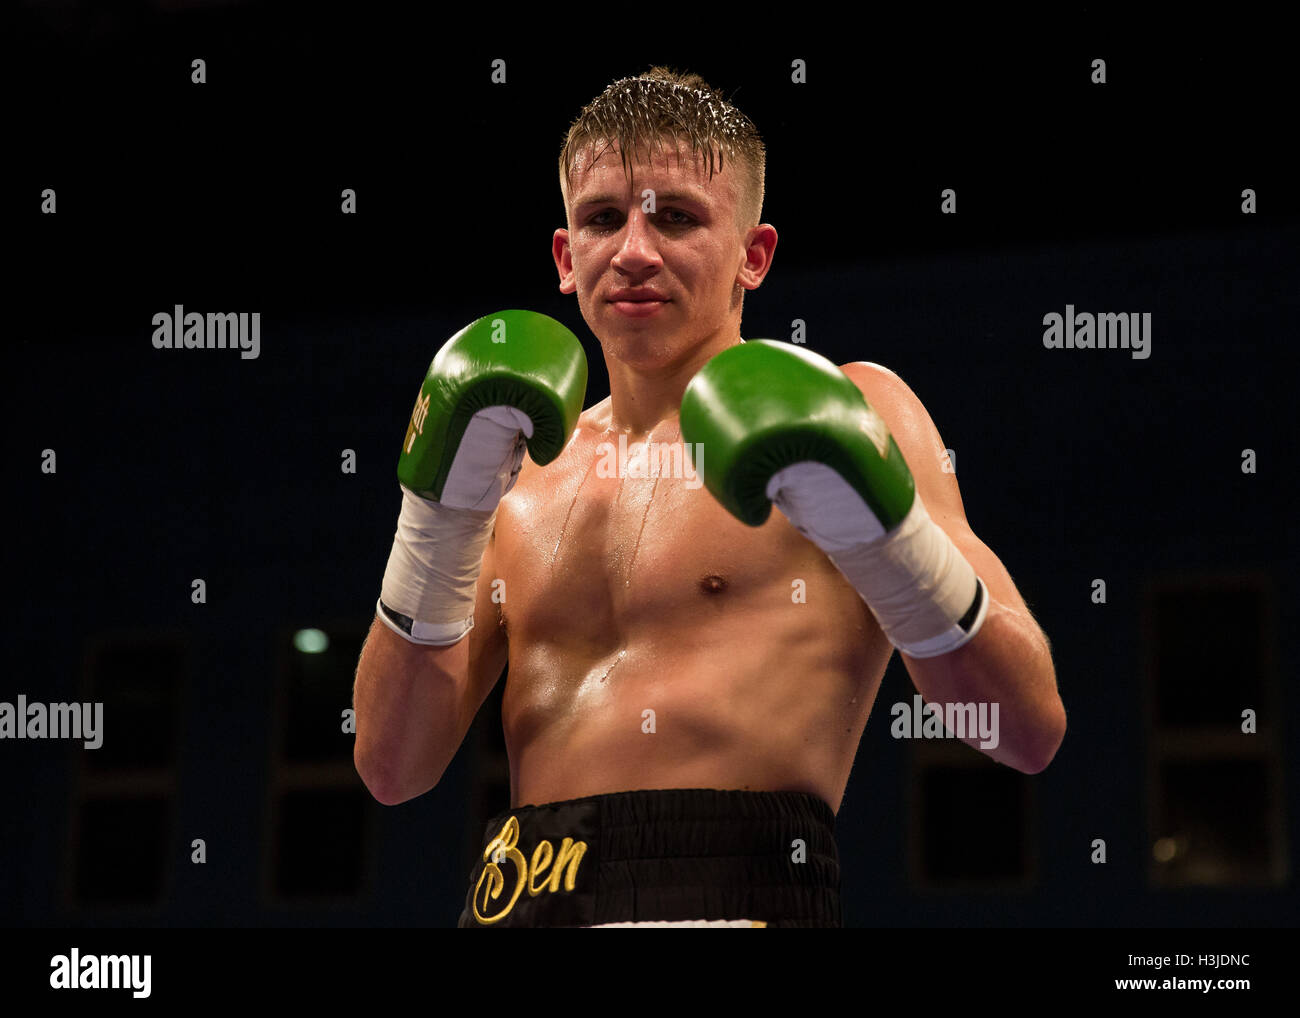 Ben Smith after winning a boxing fight Stock Photo